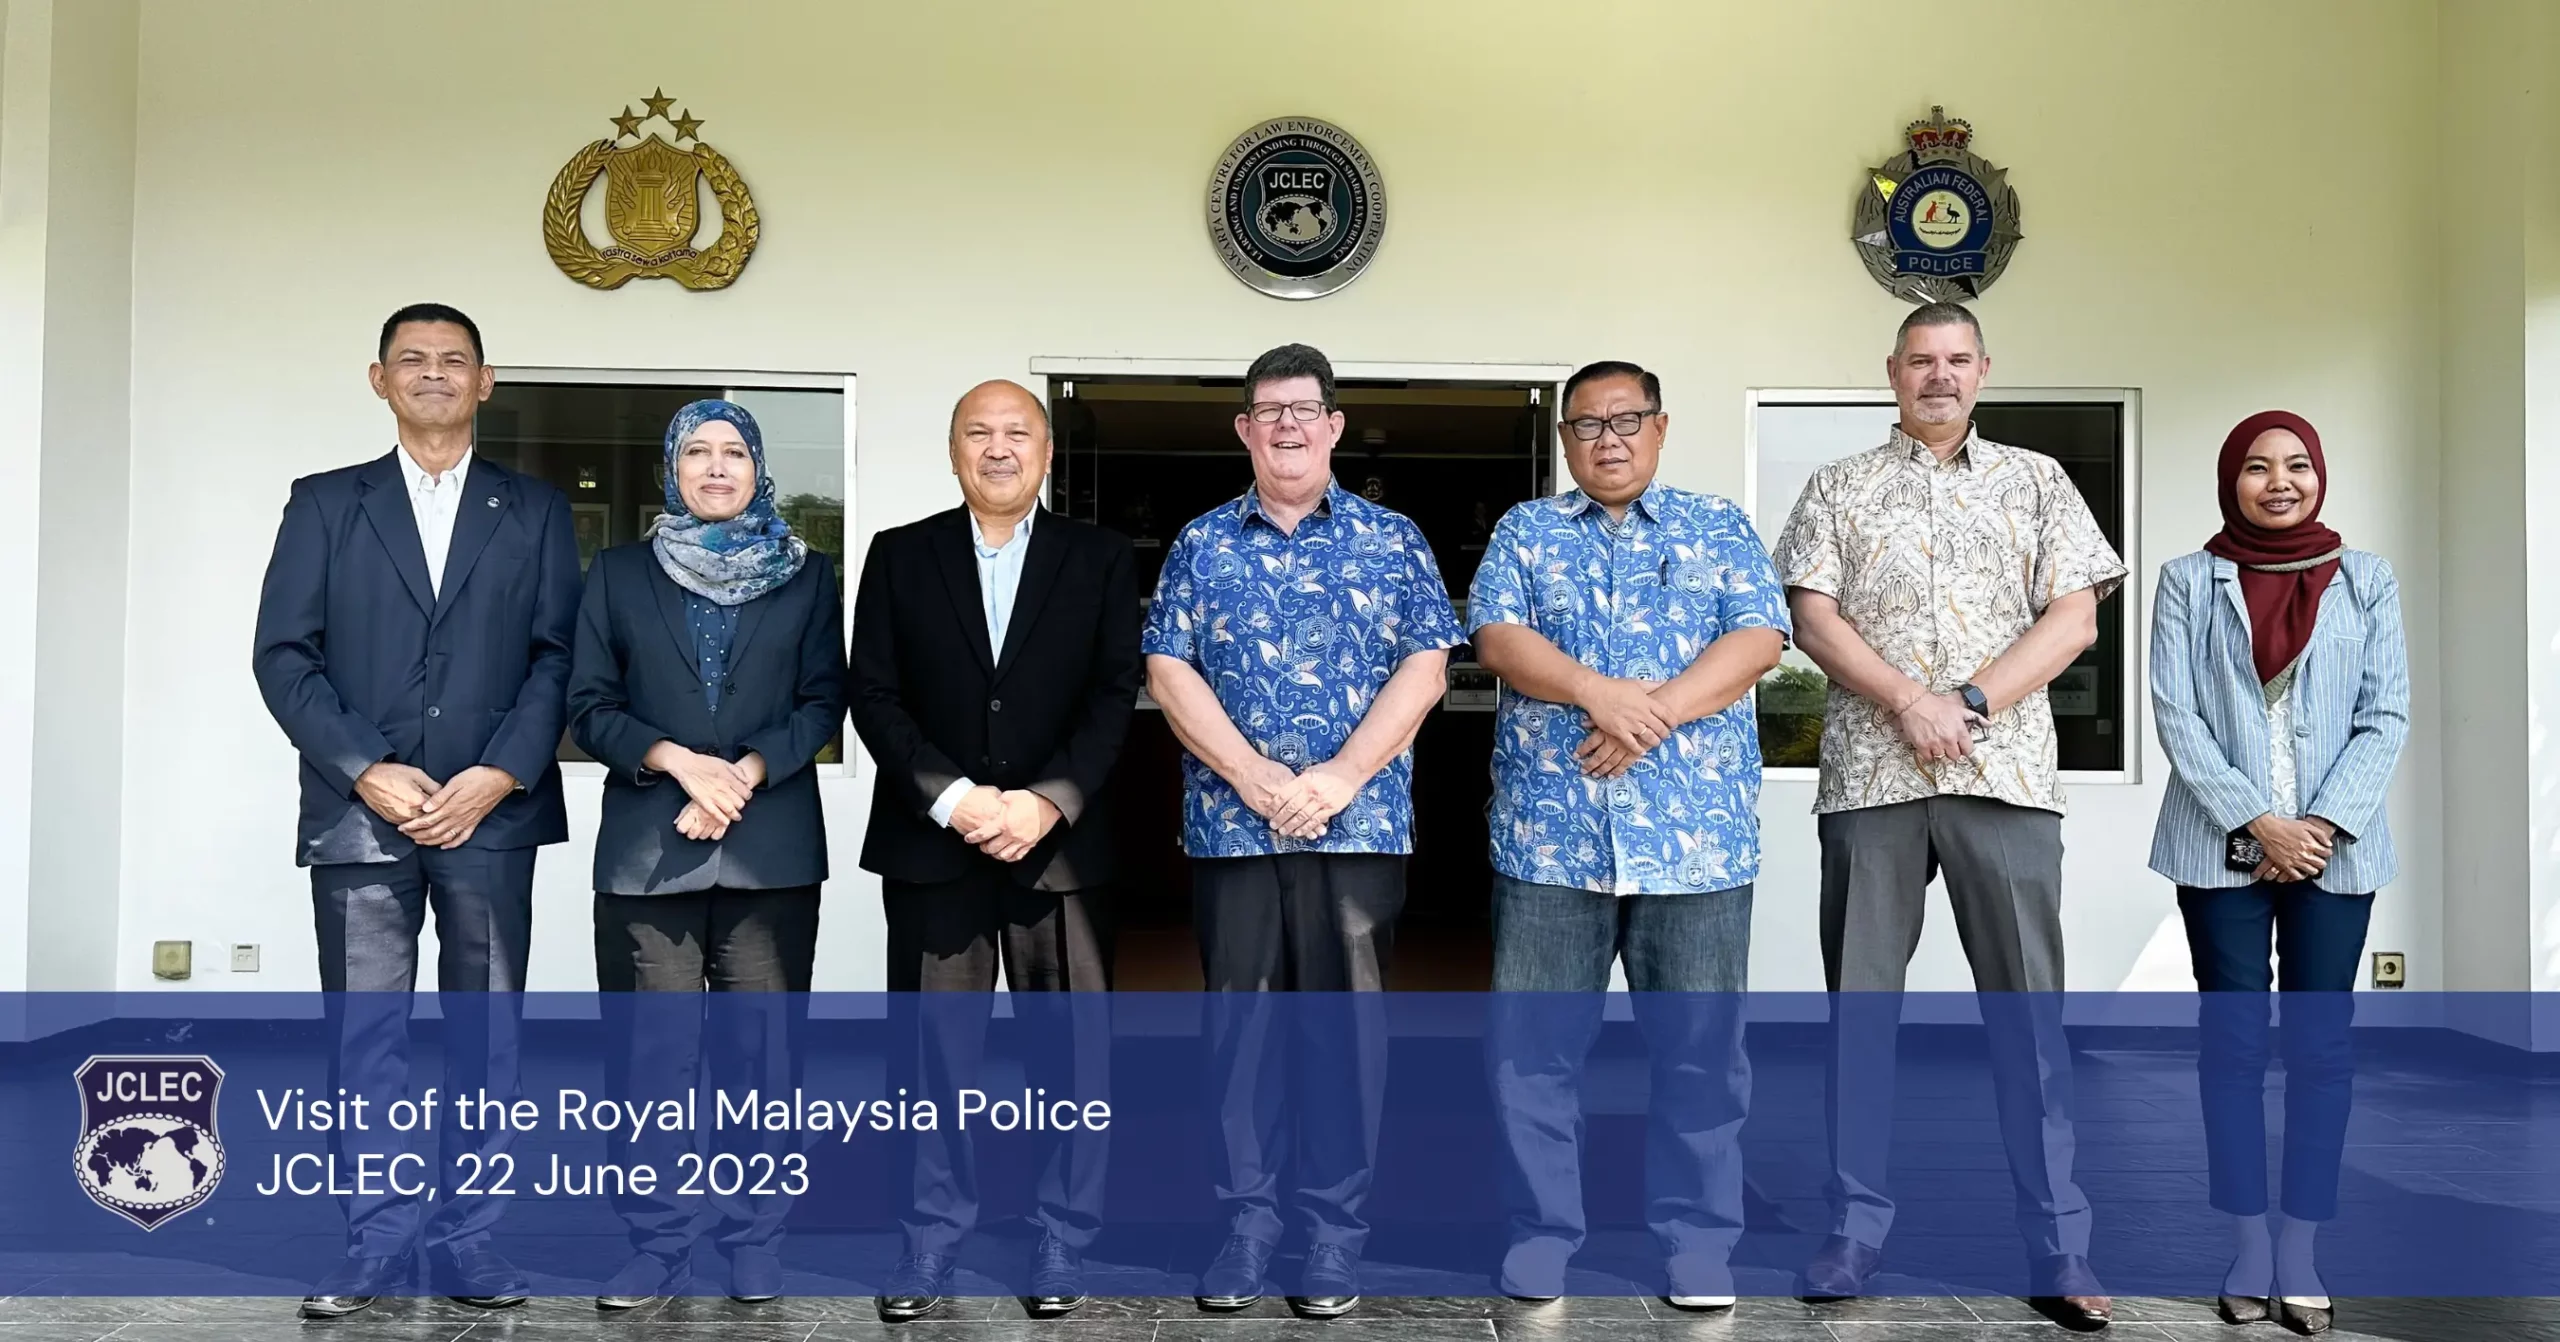 JCLEC Management with the Delegation of Royal Malaysia Police